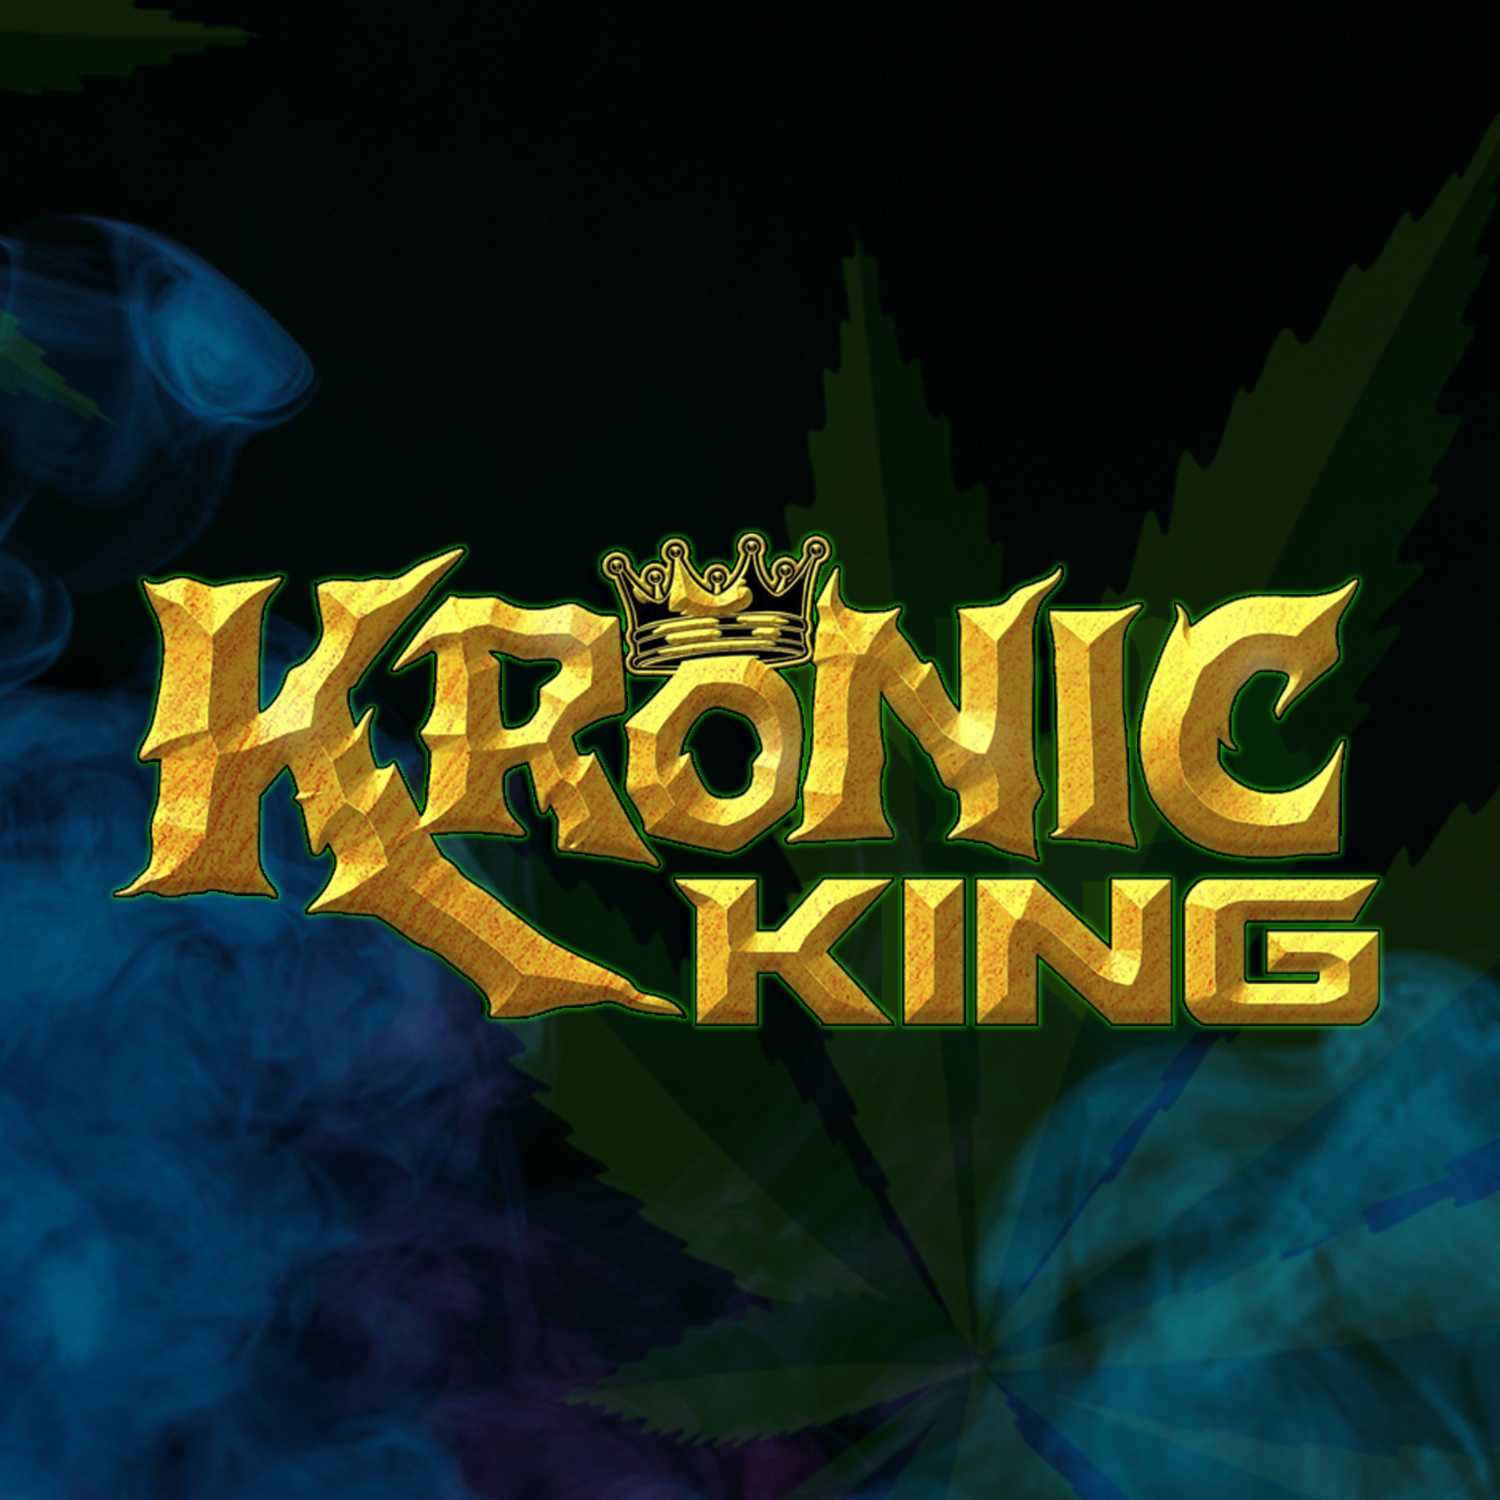 The Kronic King: Twitter Spaces